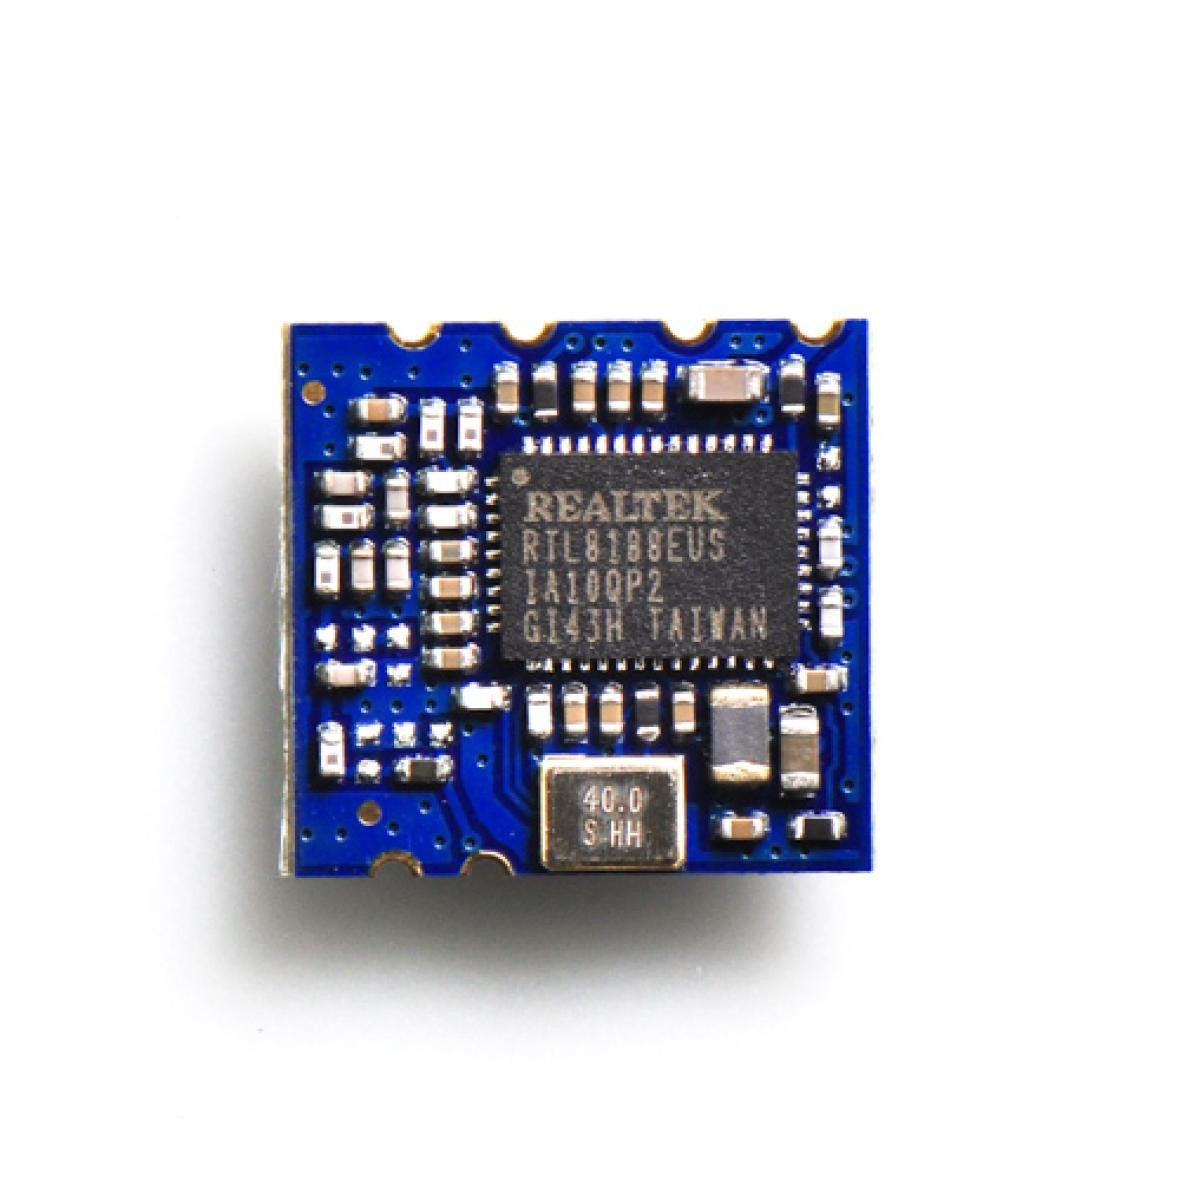 Quality RTL8188EUS 802.11n USB Realtek WiFi Module 2.4G 150Mbps For WiFi Adapter for sale